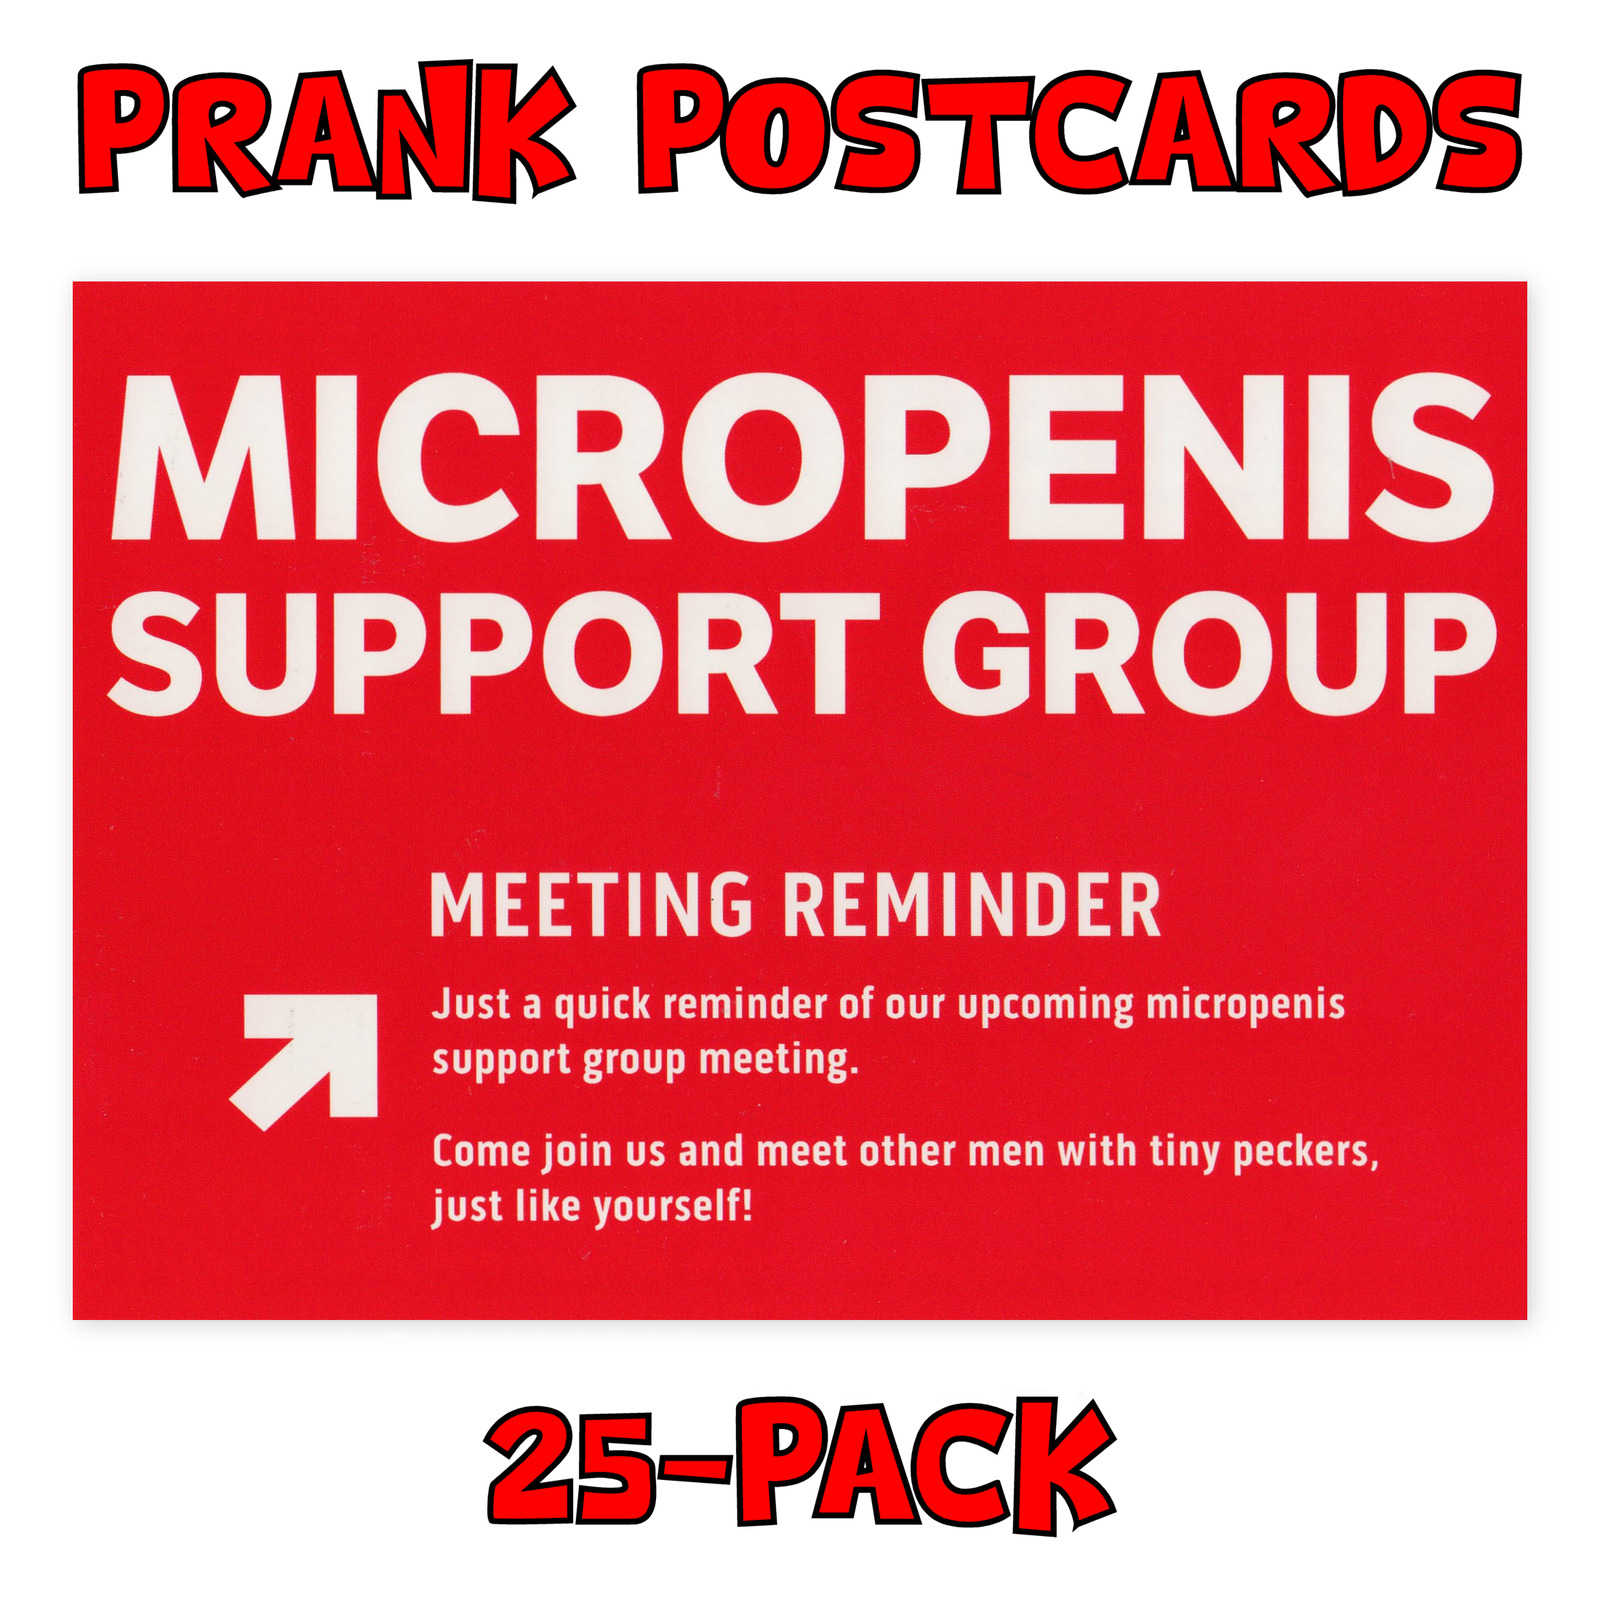 (25-Pack) Prank Postcards - Micropenis Support - Send Them To Victims Yourself